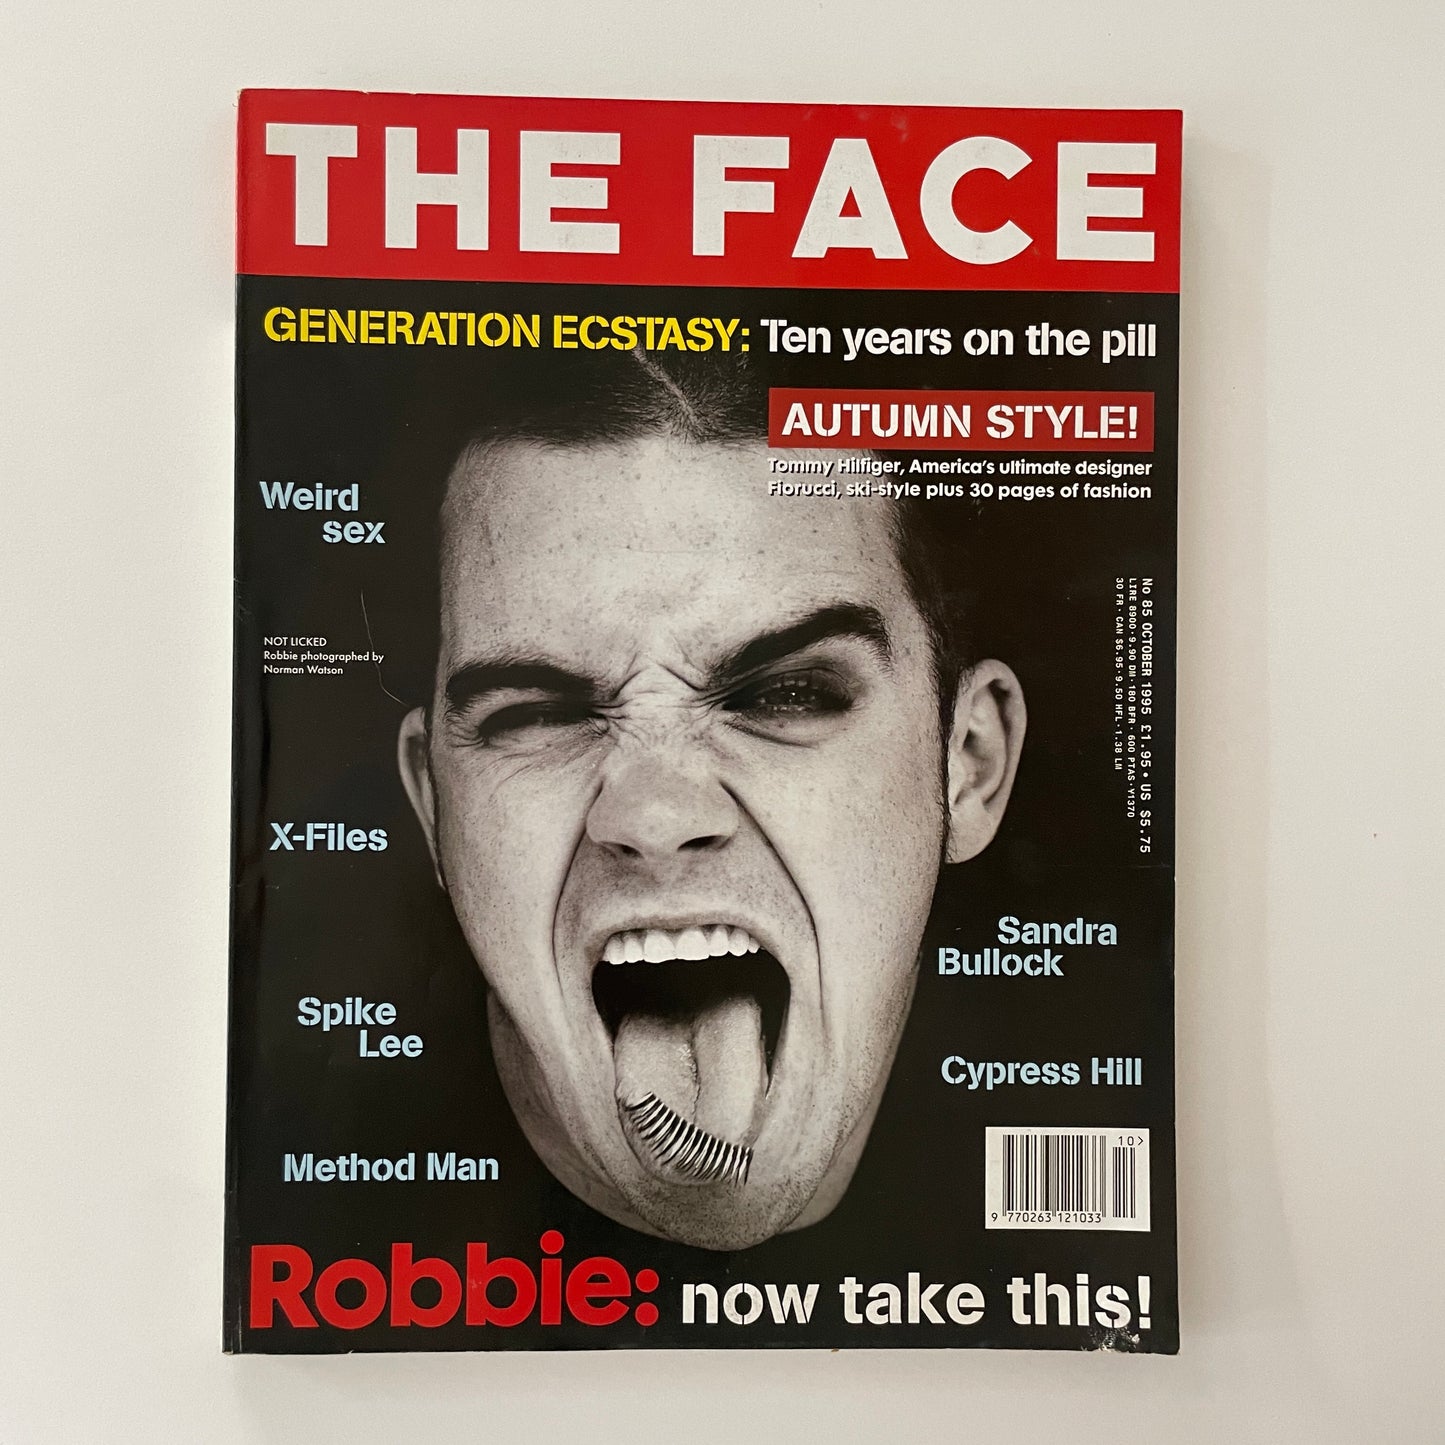 The Face No.85 - October 1995 Robbie